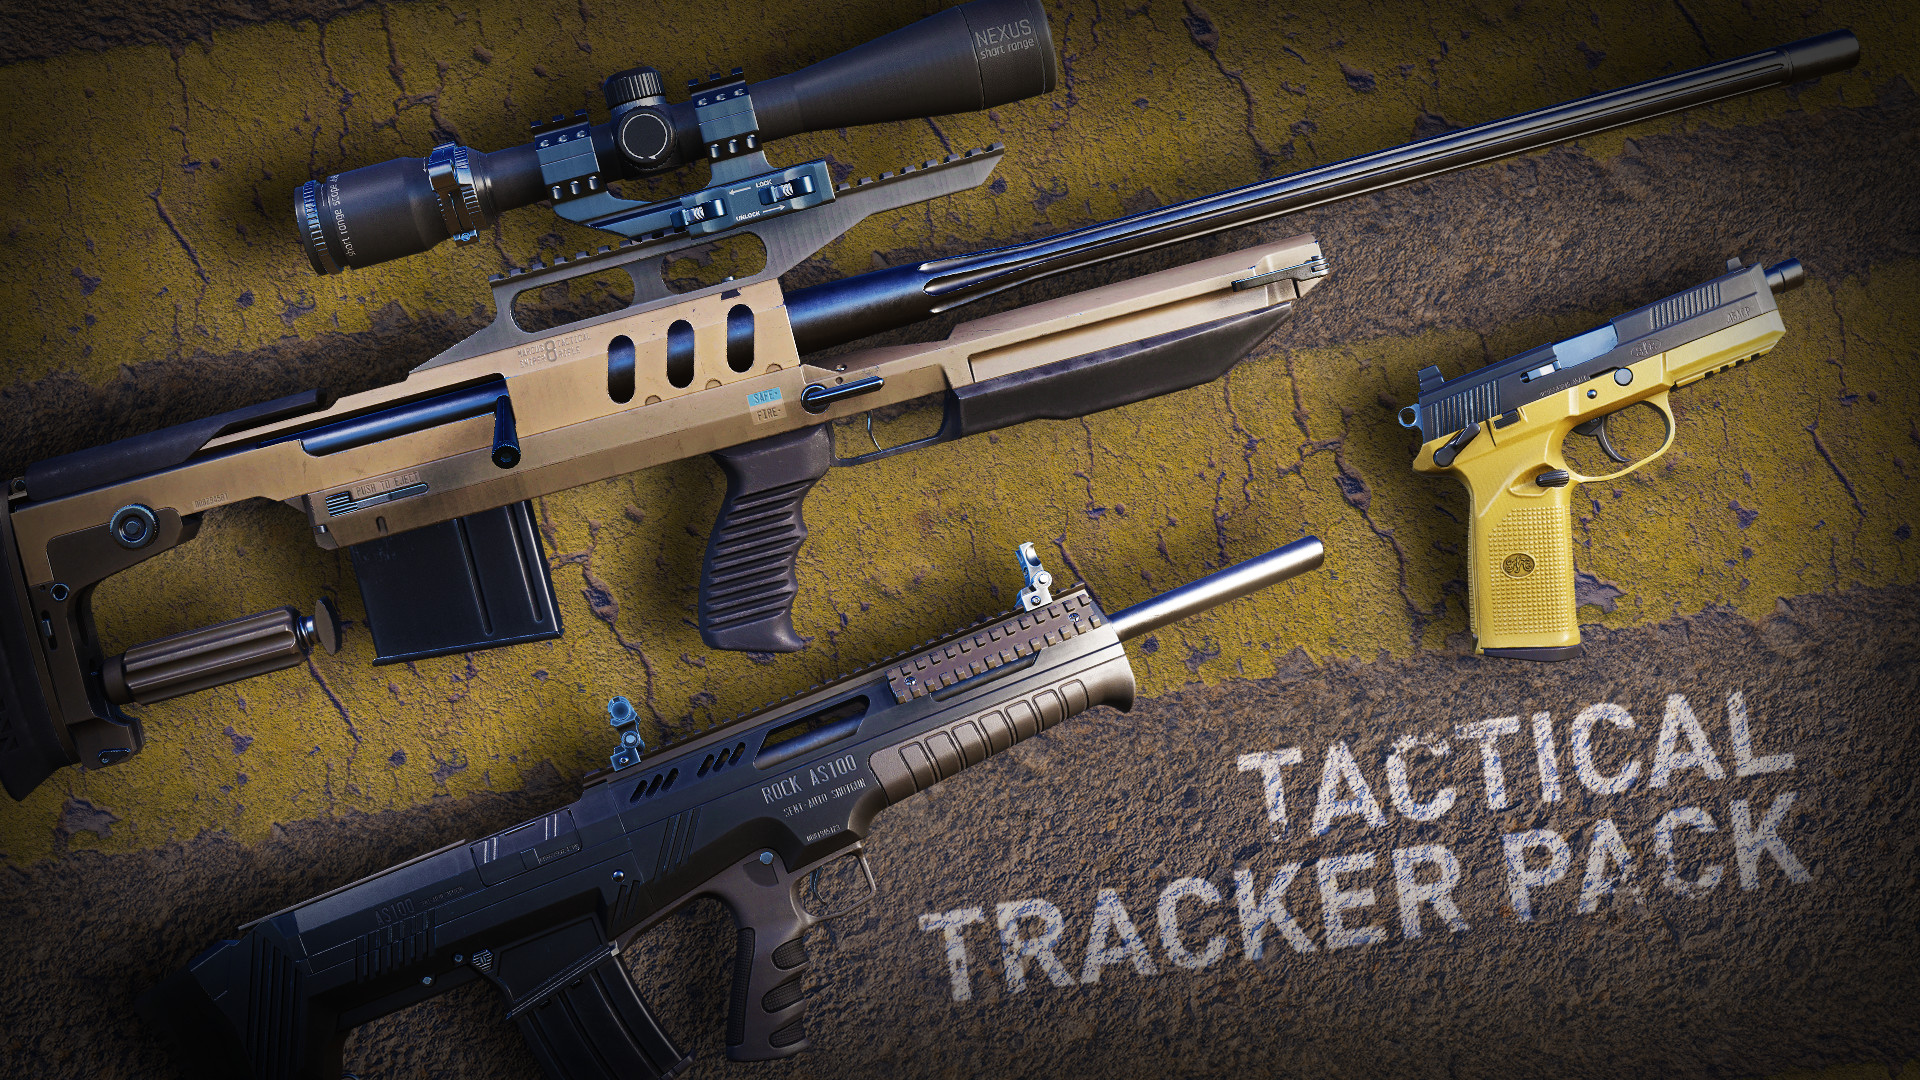 Sniper Ghost Warrior Contracts 2 - Tactical Tracker Weapons Pack Featured Screenshot #1